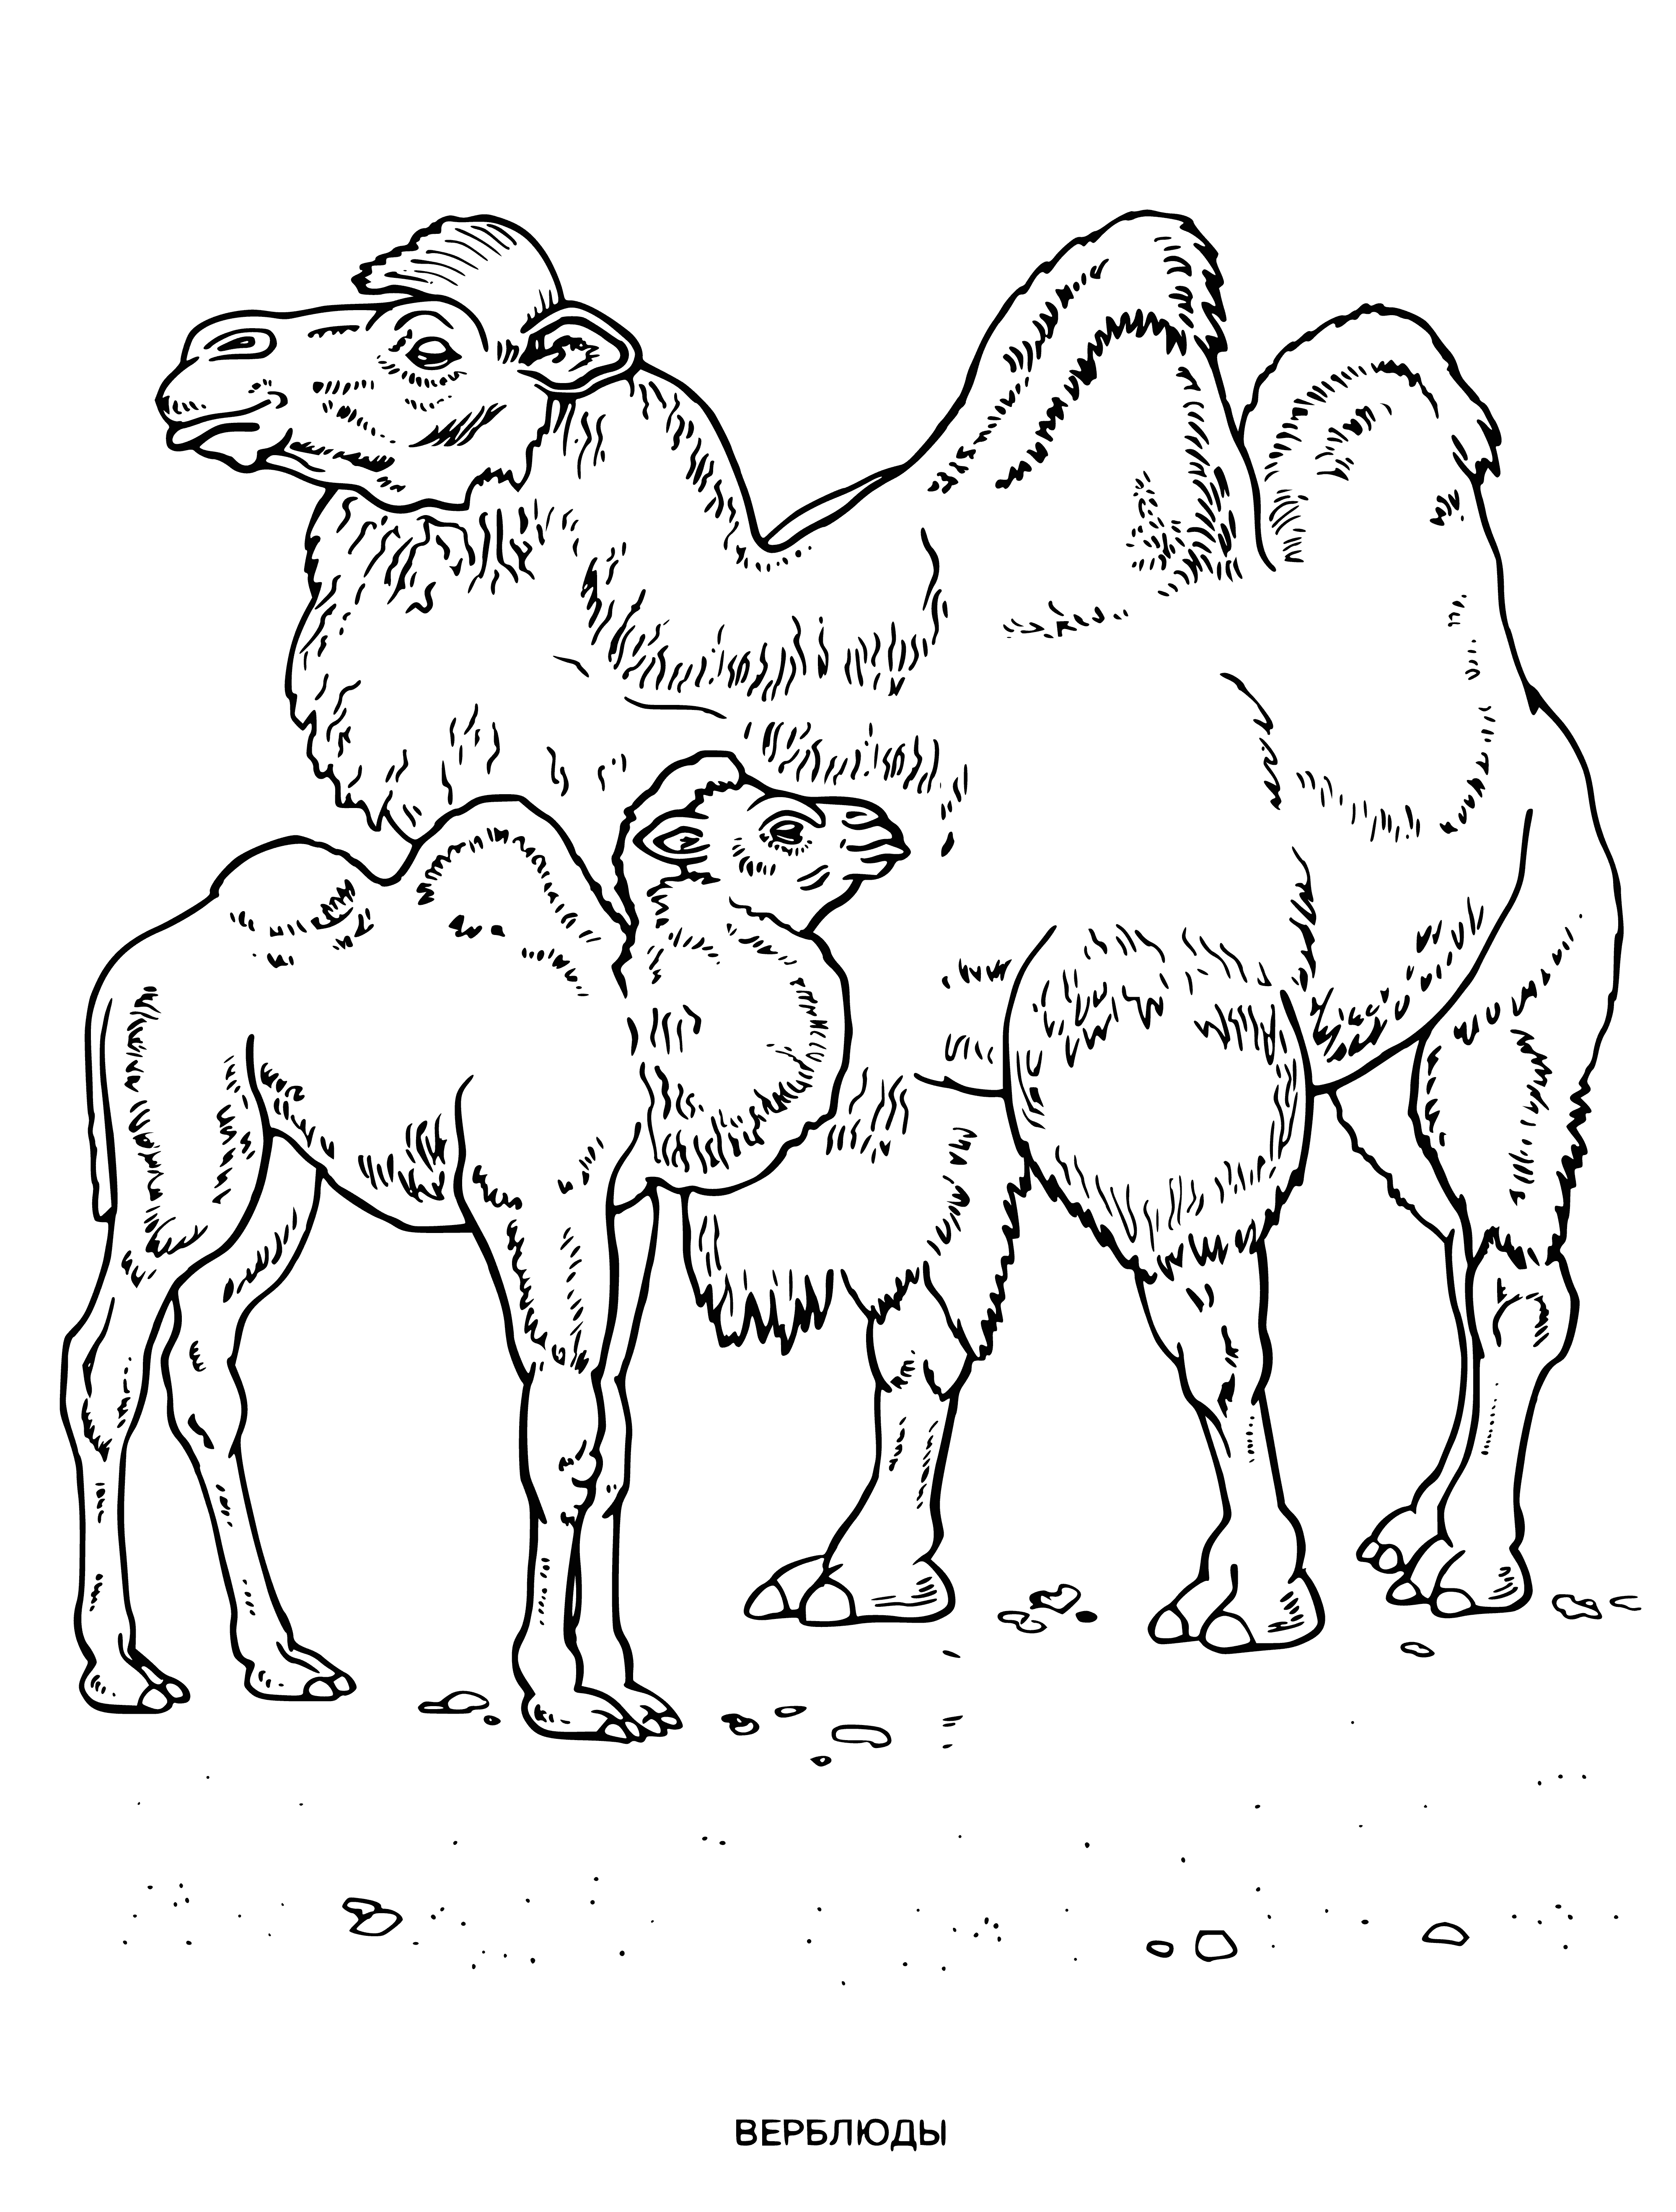 Camels coloring page